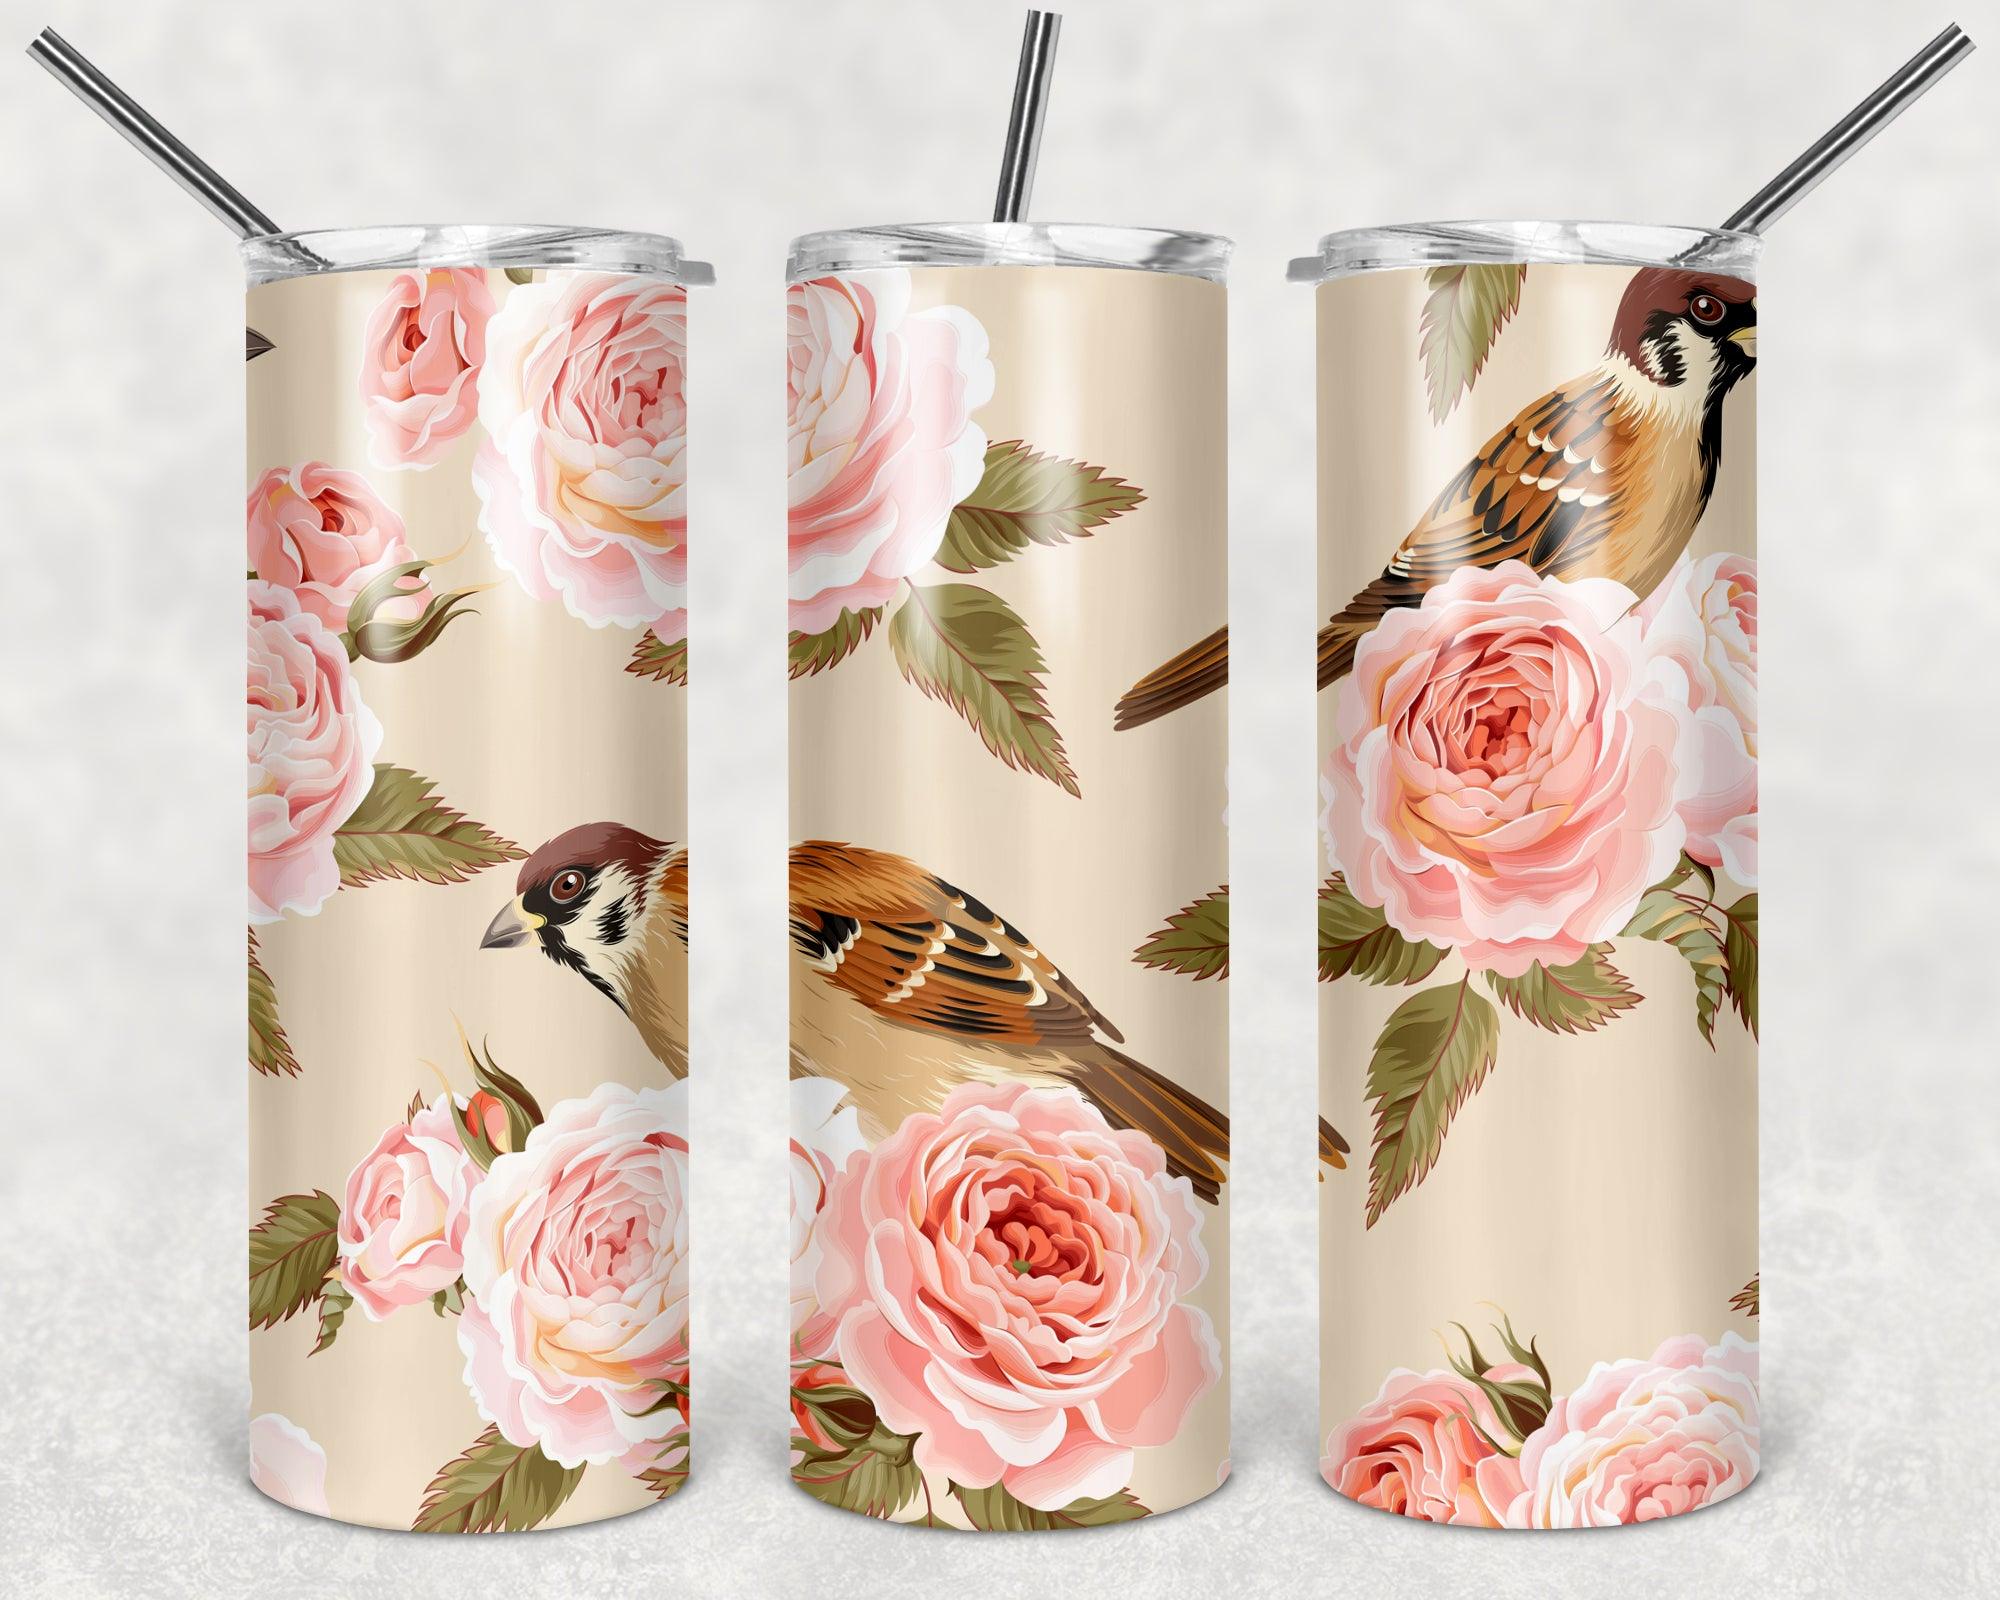 Flower And Nightingale Tumbler Wrap PNG, Nightingale Background 20oz Skinny Tumbler Designs, Designs PNG - TheDigitalSVG